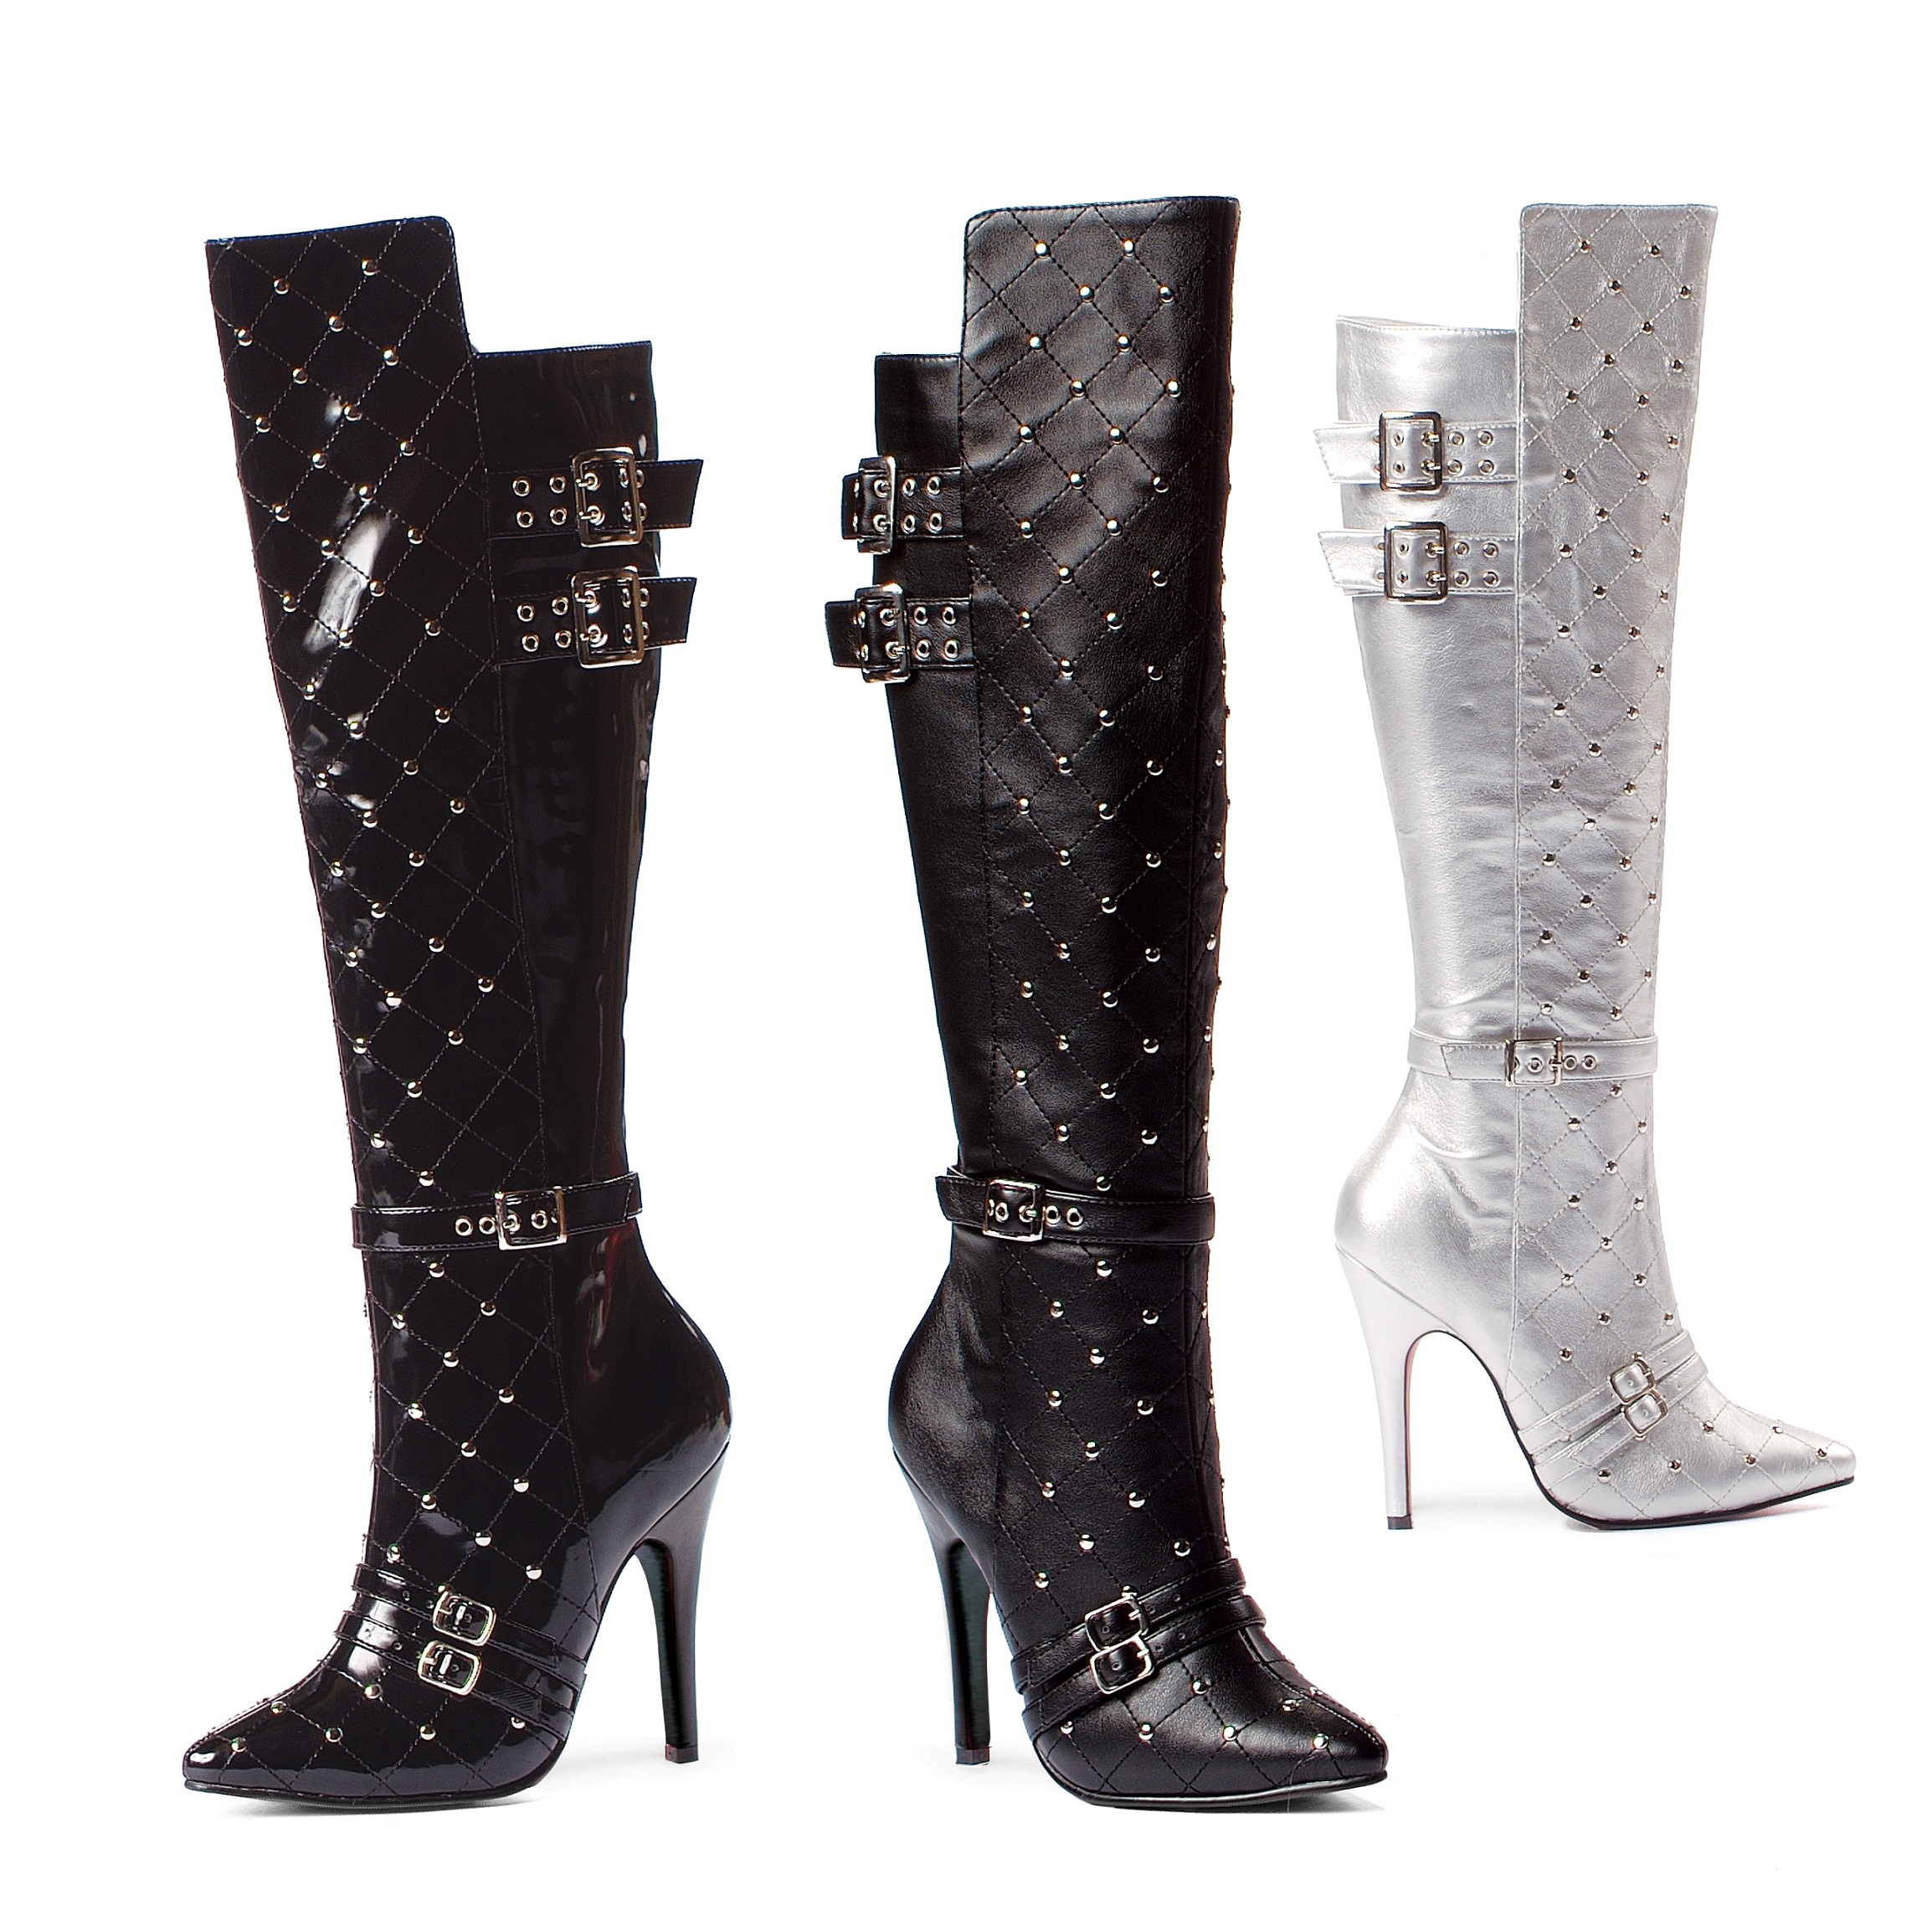 Gwen - 5 Inch Boots w-Buckle Straps and Studs